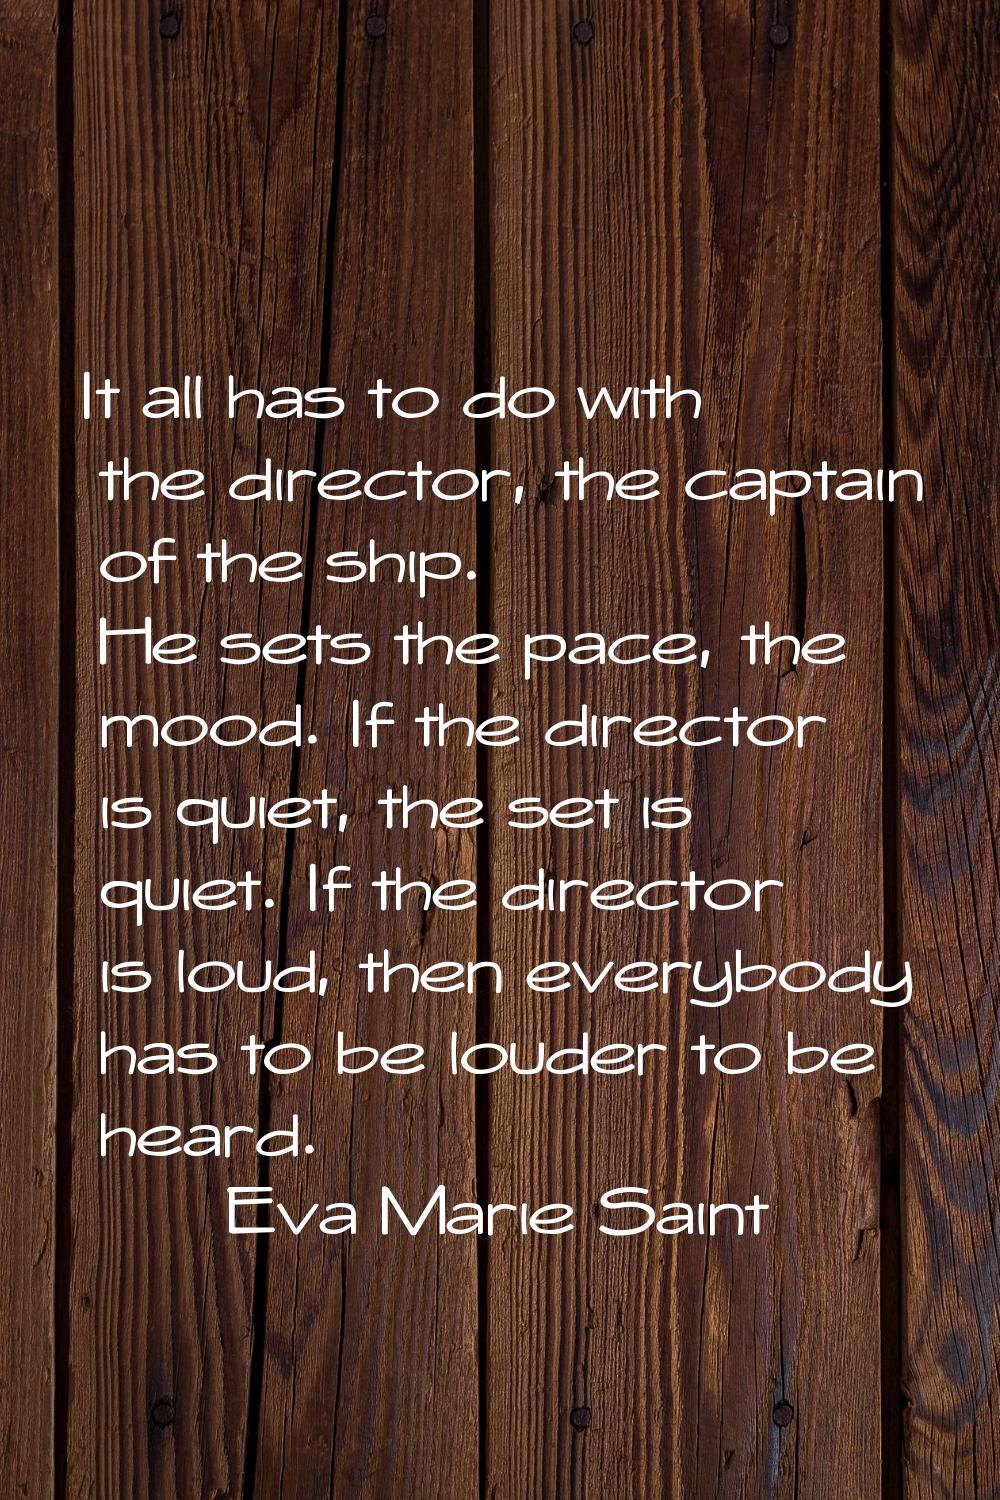 It all has to do with the director, the captain of the ship. He sets the pace, the mood. If the dir